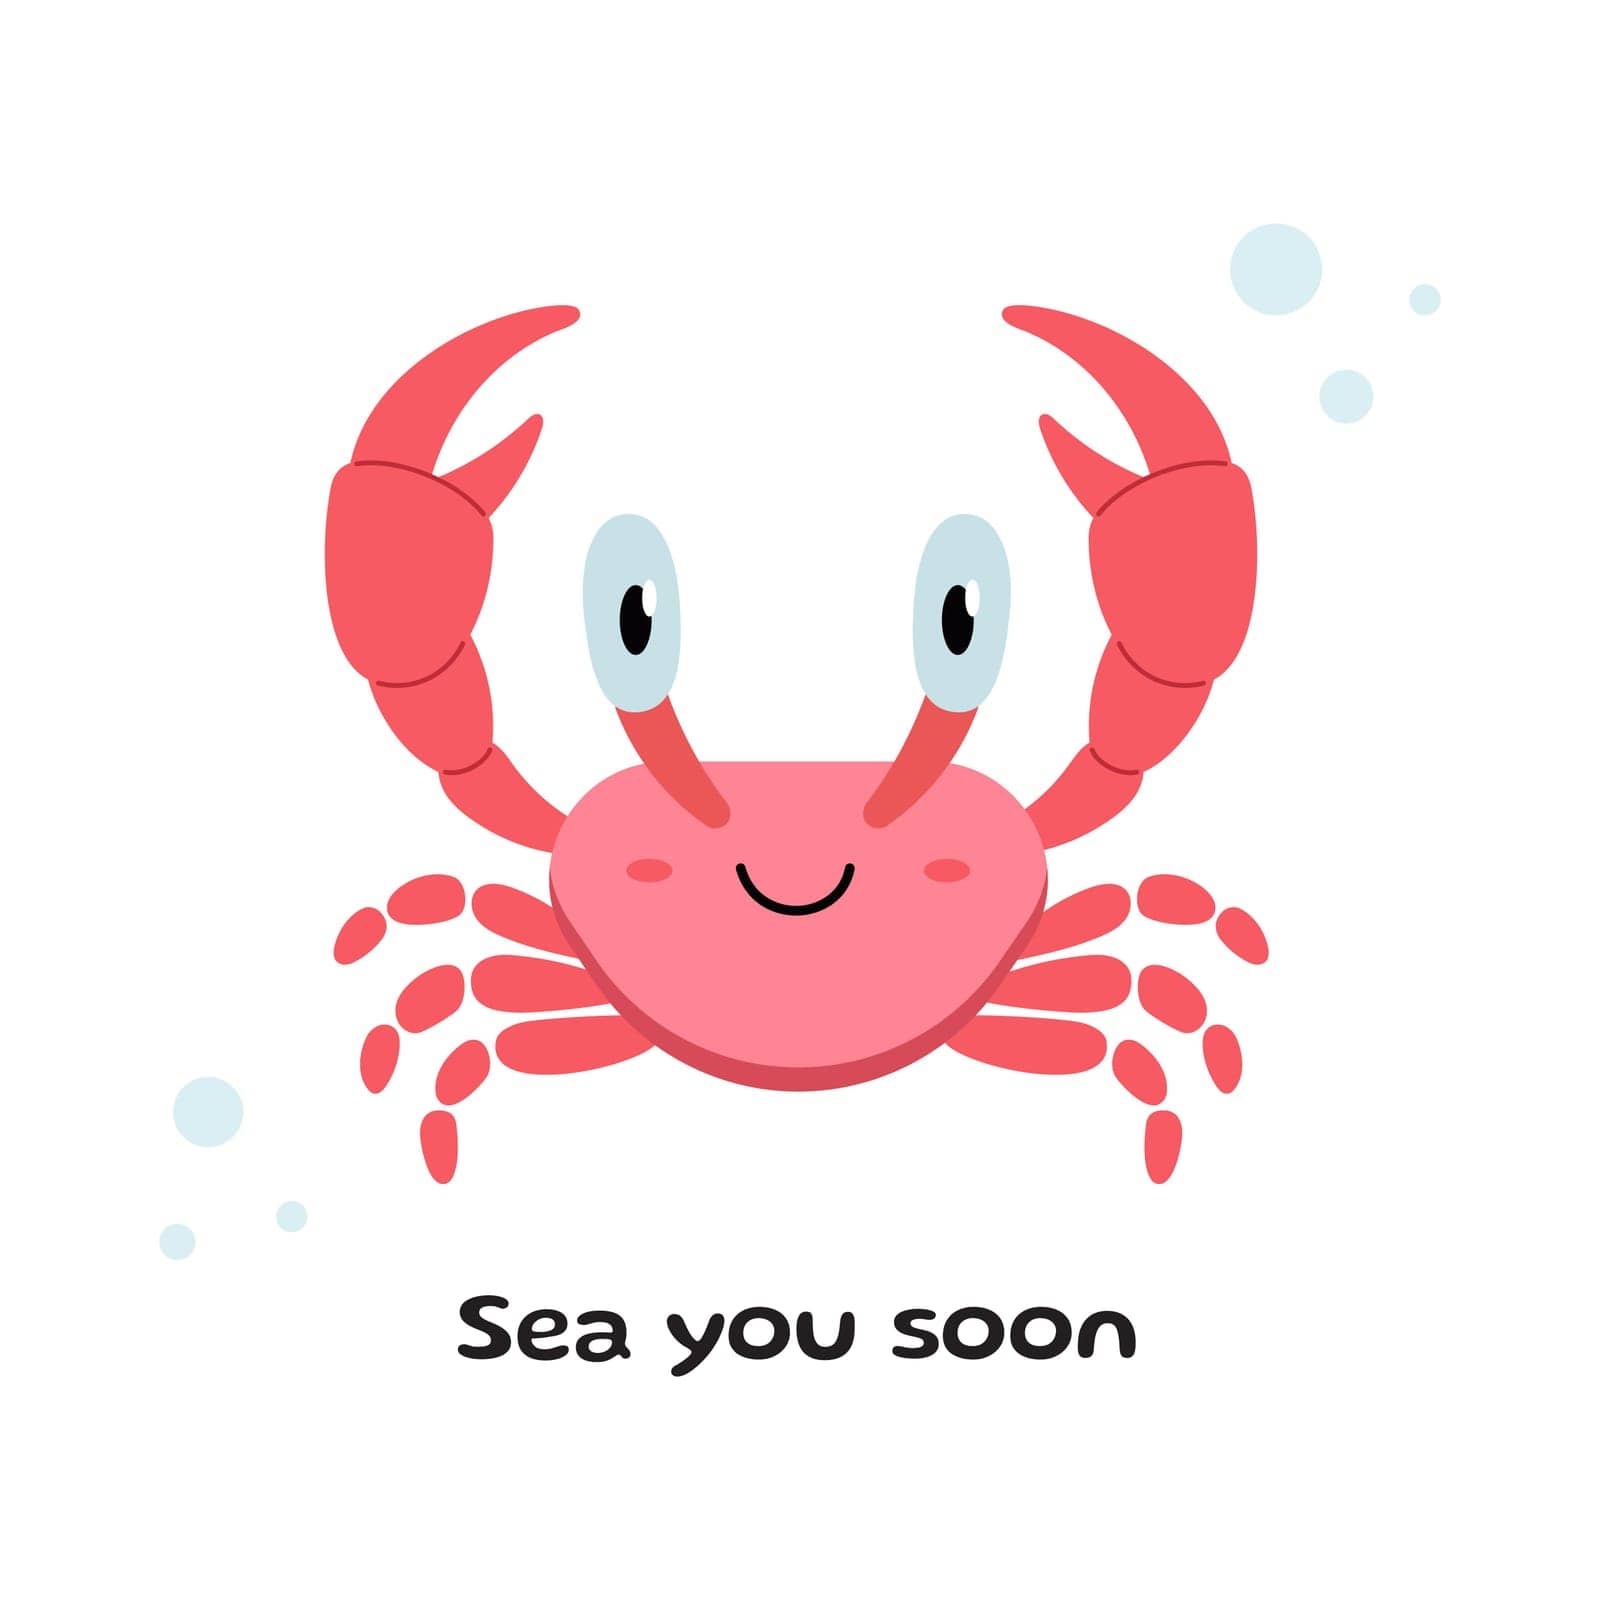 Cute cartoon crab. Postcard with crab and text. Vector illustration of crab. Sea animal, sea creature. Kids illustration in cartoon style. Flat design. Underwater life.